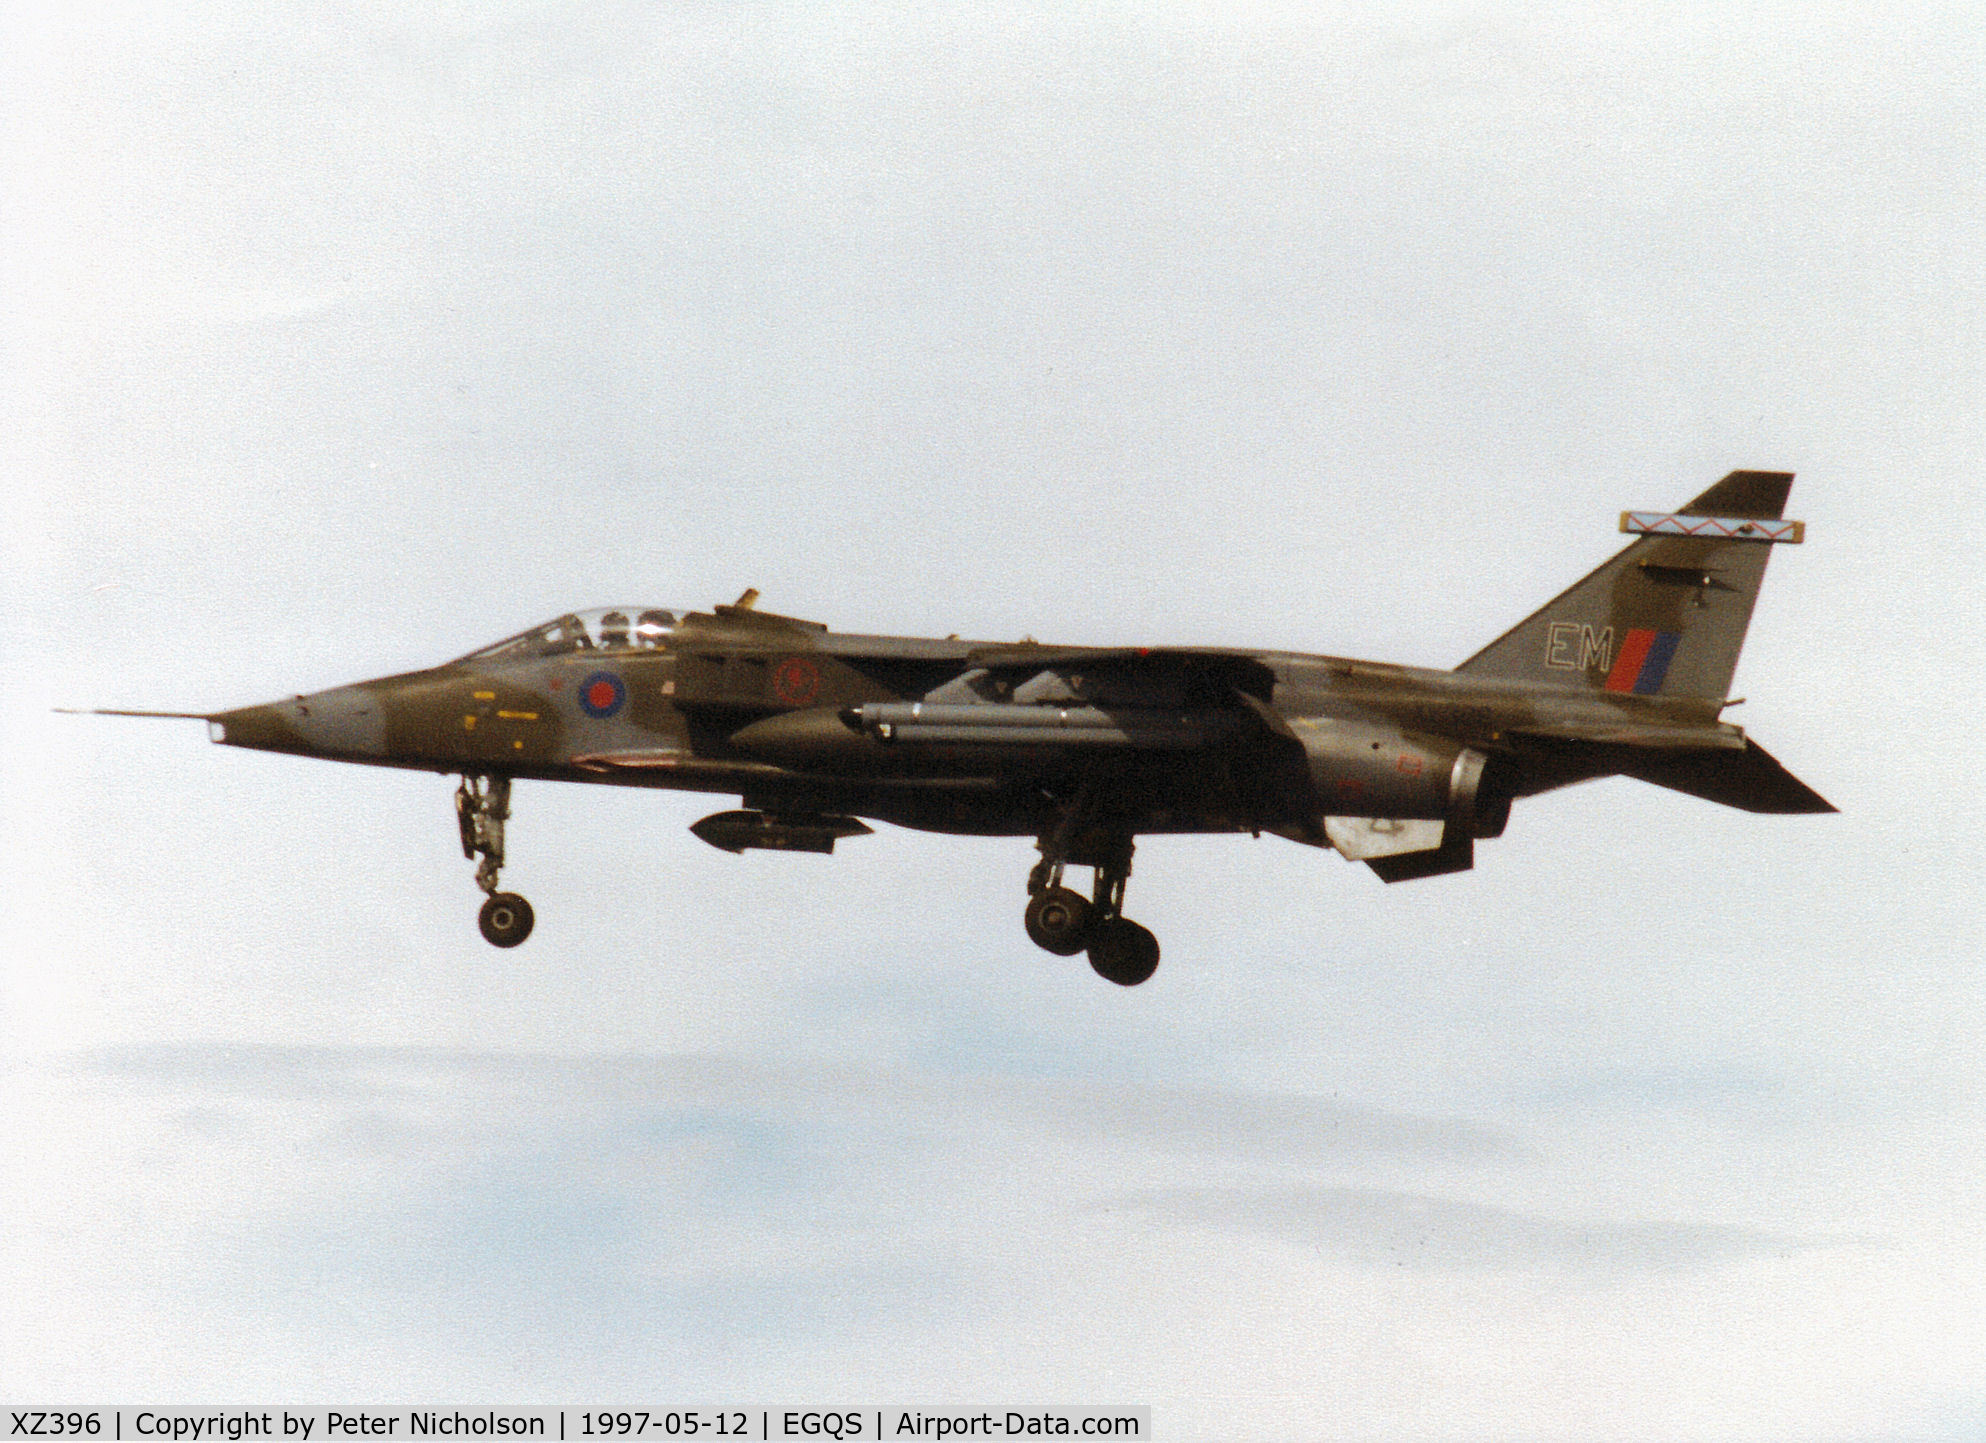 XZ396, 1977 Sepecat Jaguar GR.1A C/N S.161, Jaguar GR.1A, callsign Blackcat 1, of 6 Squadron at RAF Coltishall on final approach to Runway 23 at RAF Lossiemouth in the Summer of 1997.